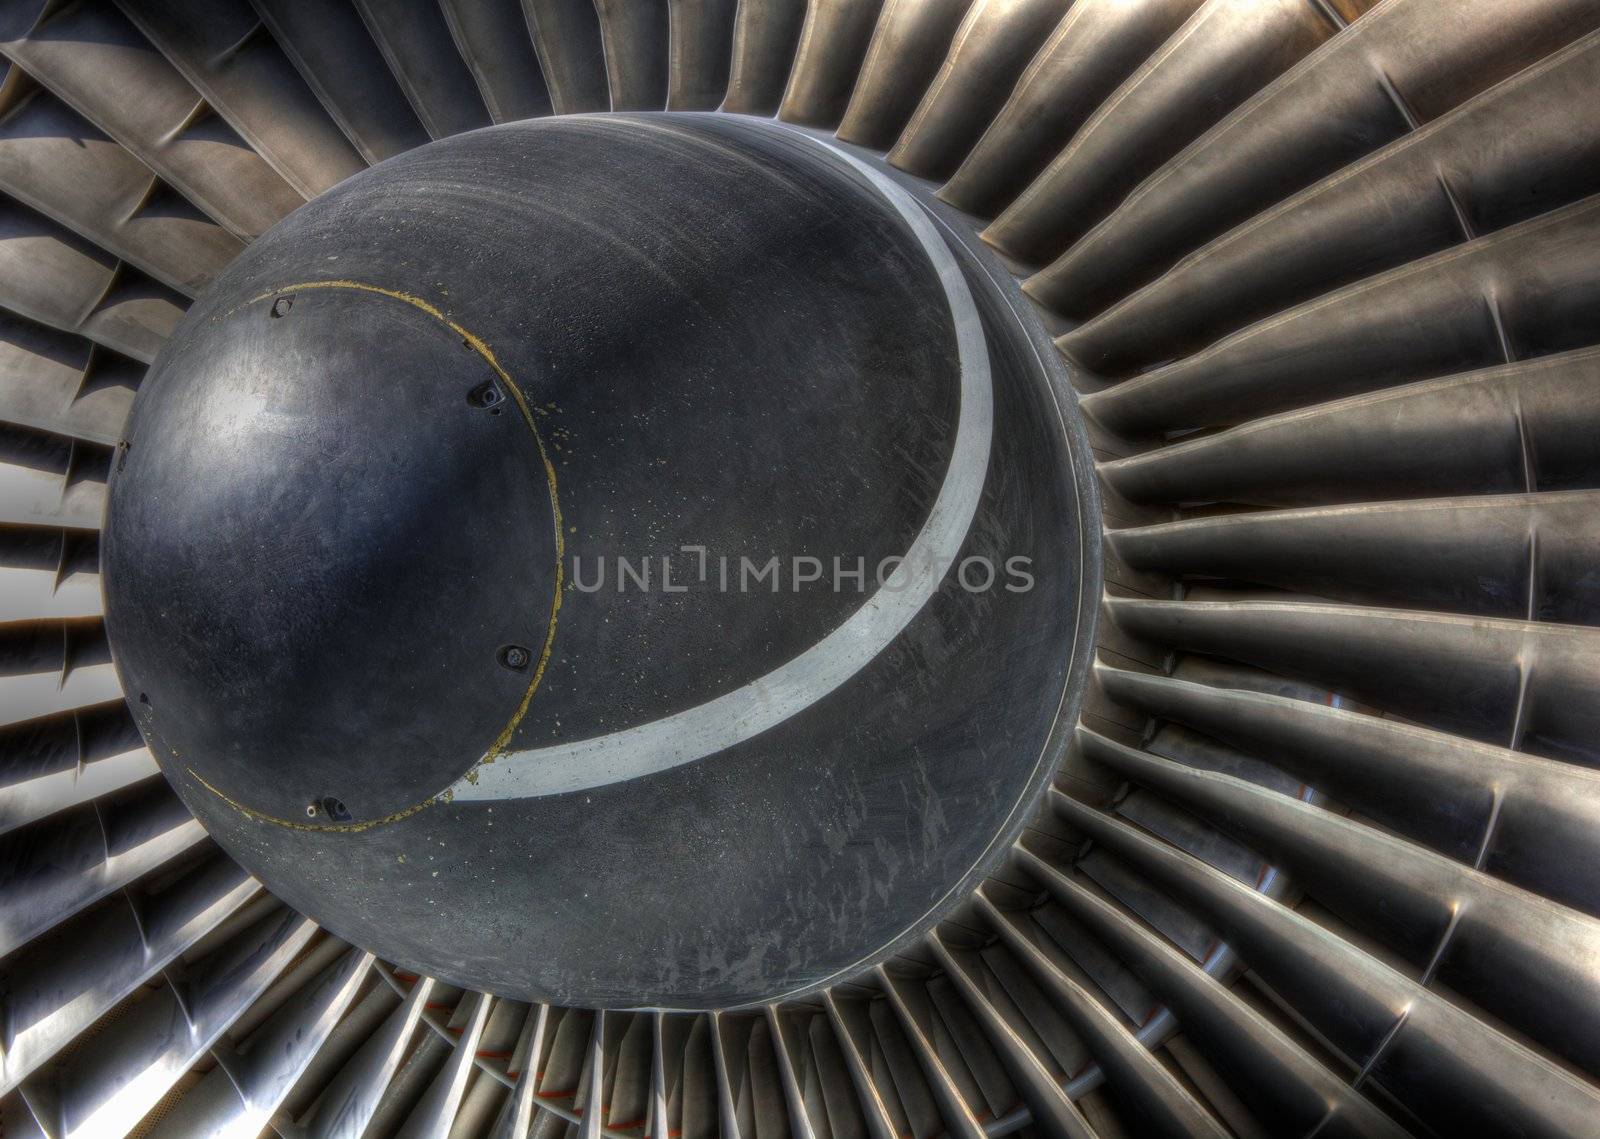 High dynamic range image of the inlet turbo vanes of a jet engine